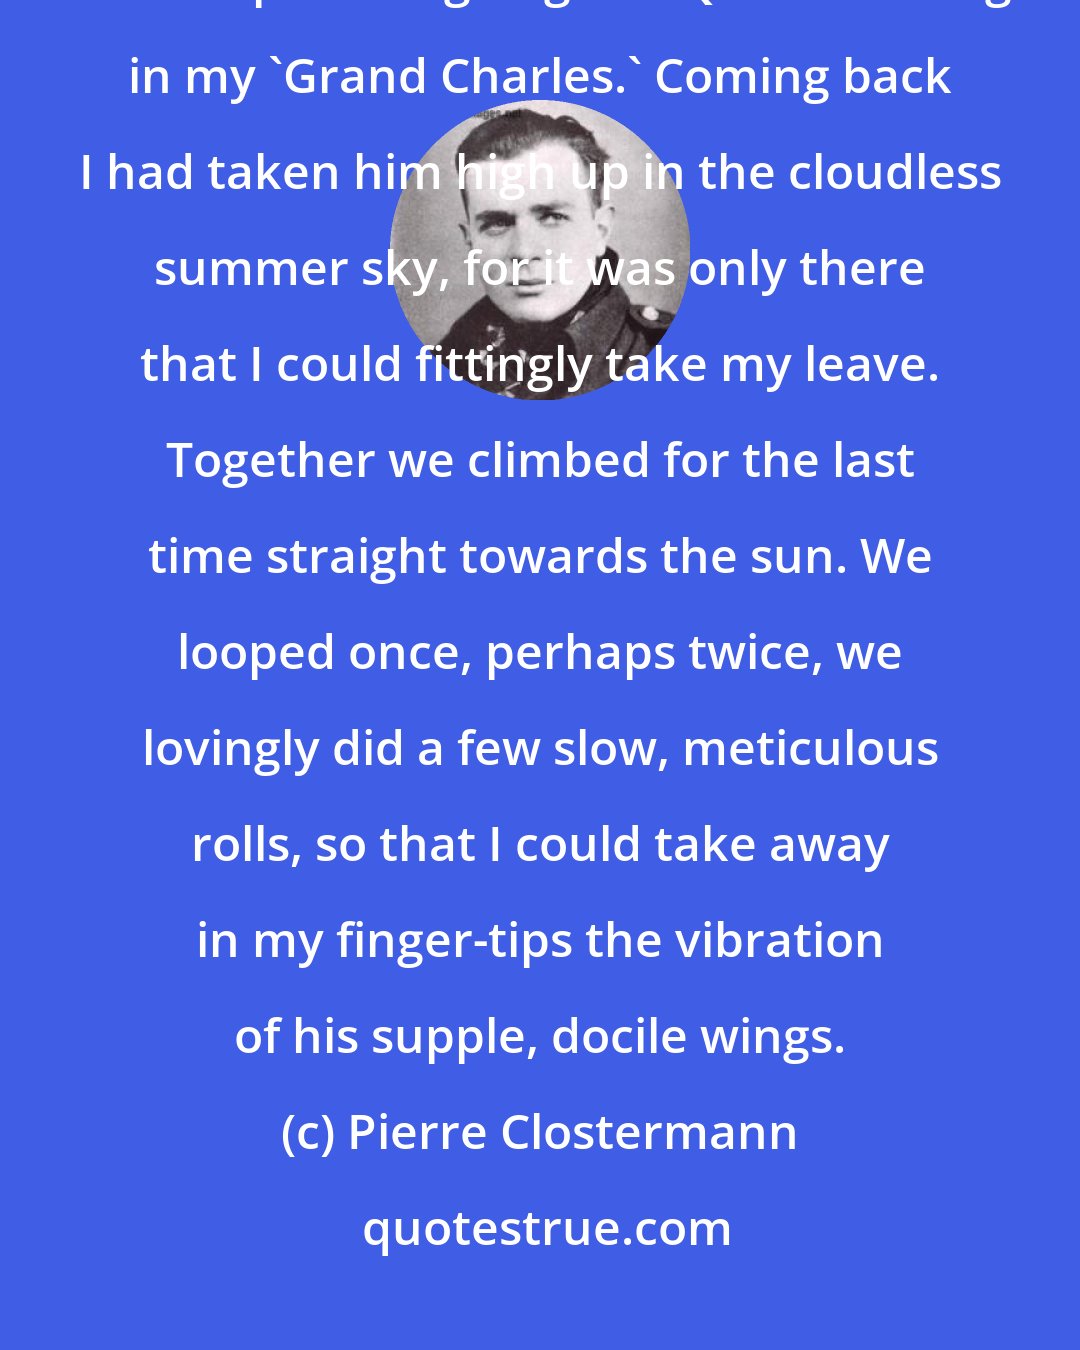 Pierre Clostermann: I had that morning gone to say my farewells to Broadhurst and to the RAF. I had made a point of going to HQ at Schleswig in my 'Grand Charles.' Coming back I had taken him high up in the cloudless summer sky, for it was only there that I could fittingly take my leave. Together we climbed for the last time straight towards the sun. We looped once, perhaps twice, we lovingly did a few slow, meticulous rolls, so that I could take away in my finger-tips the vibration of his supple, docile wings.